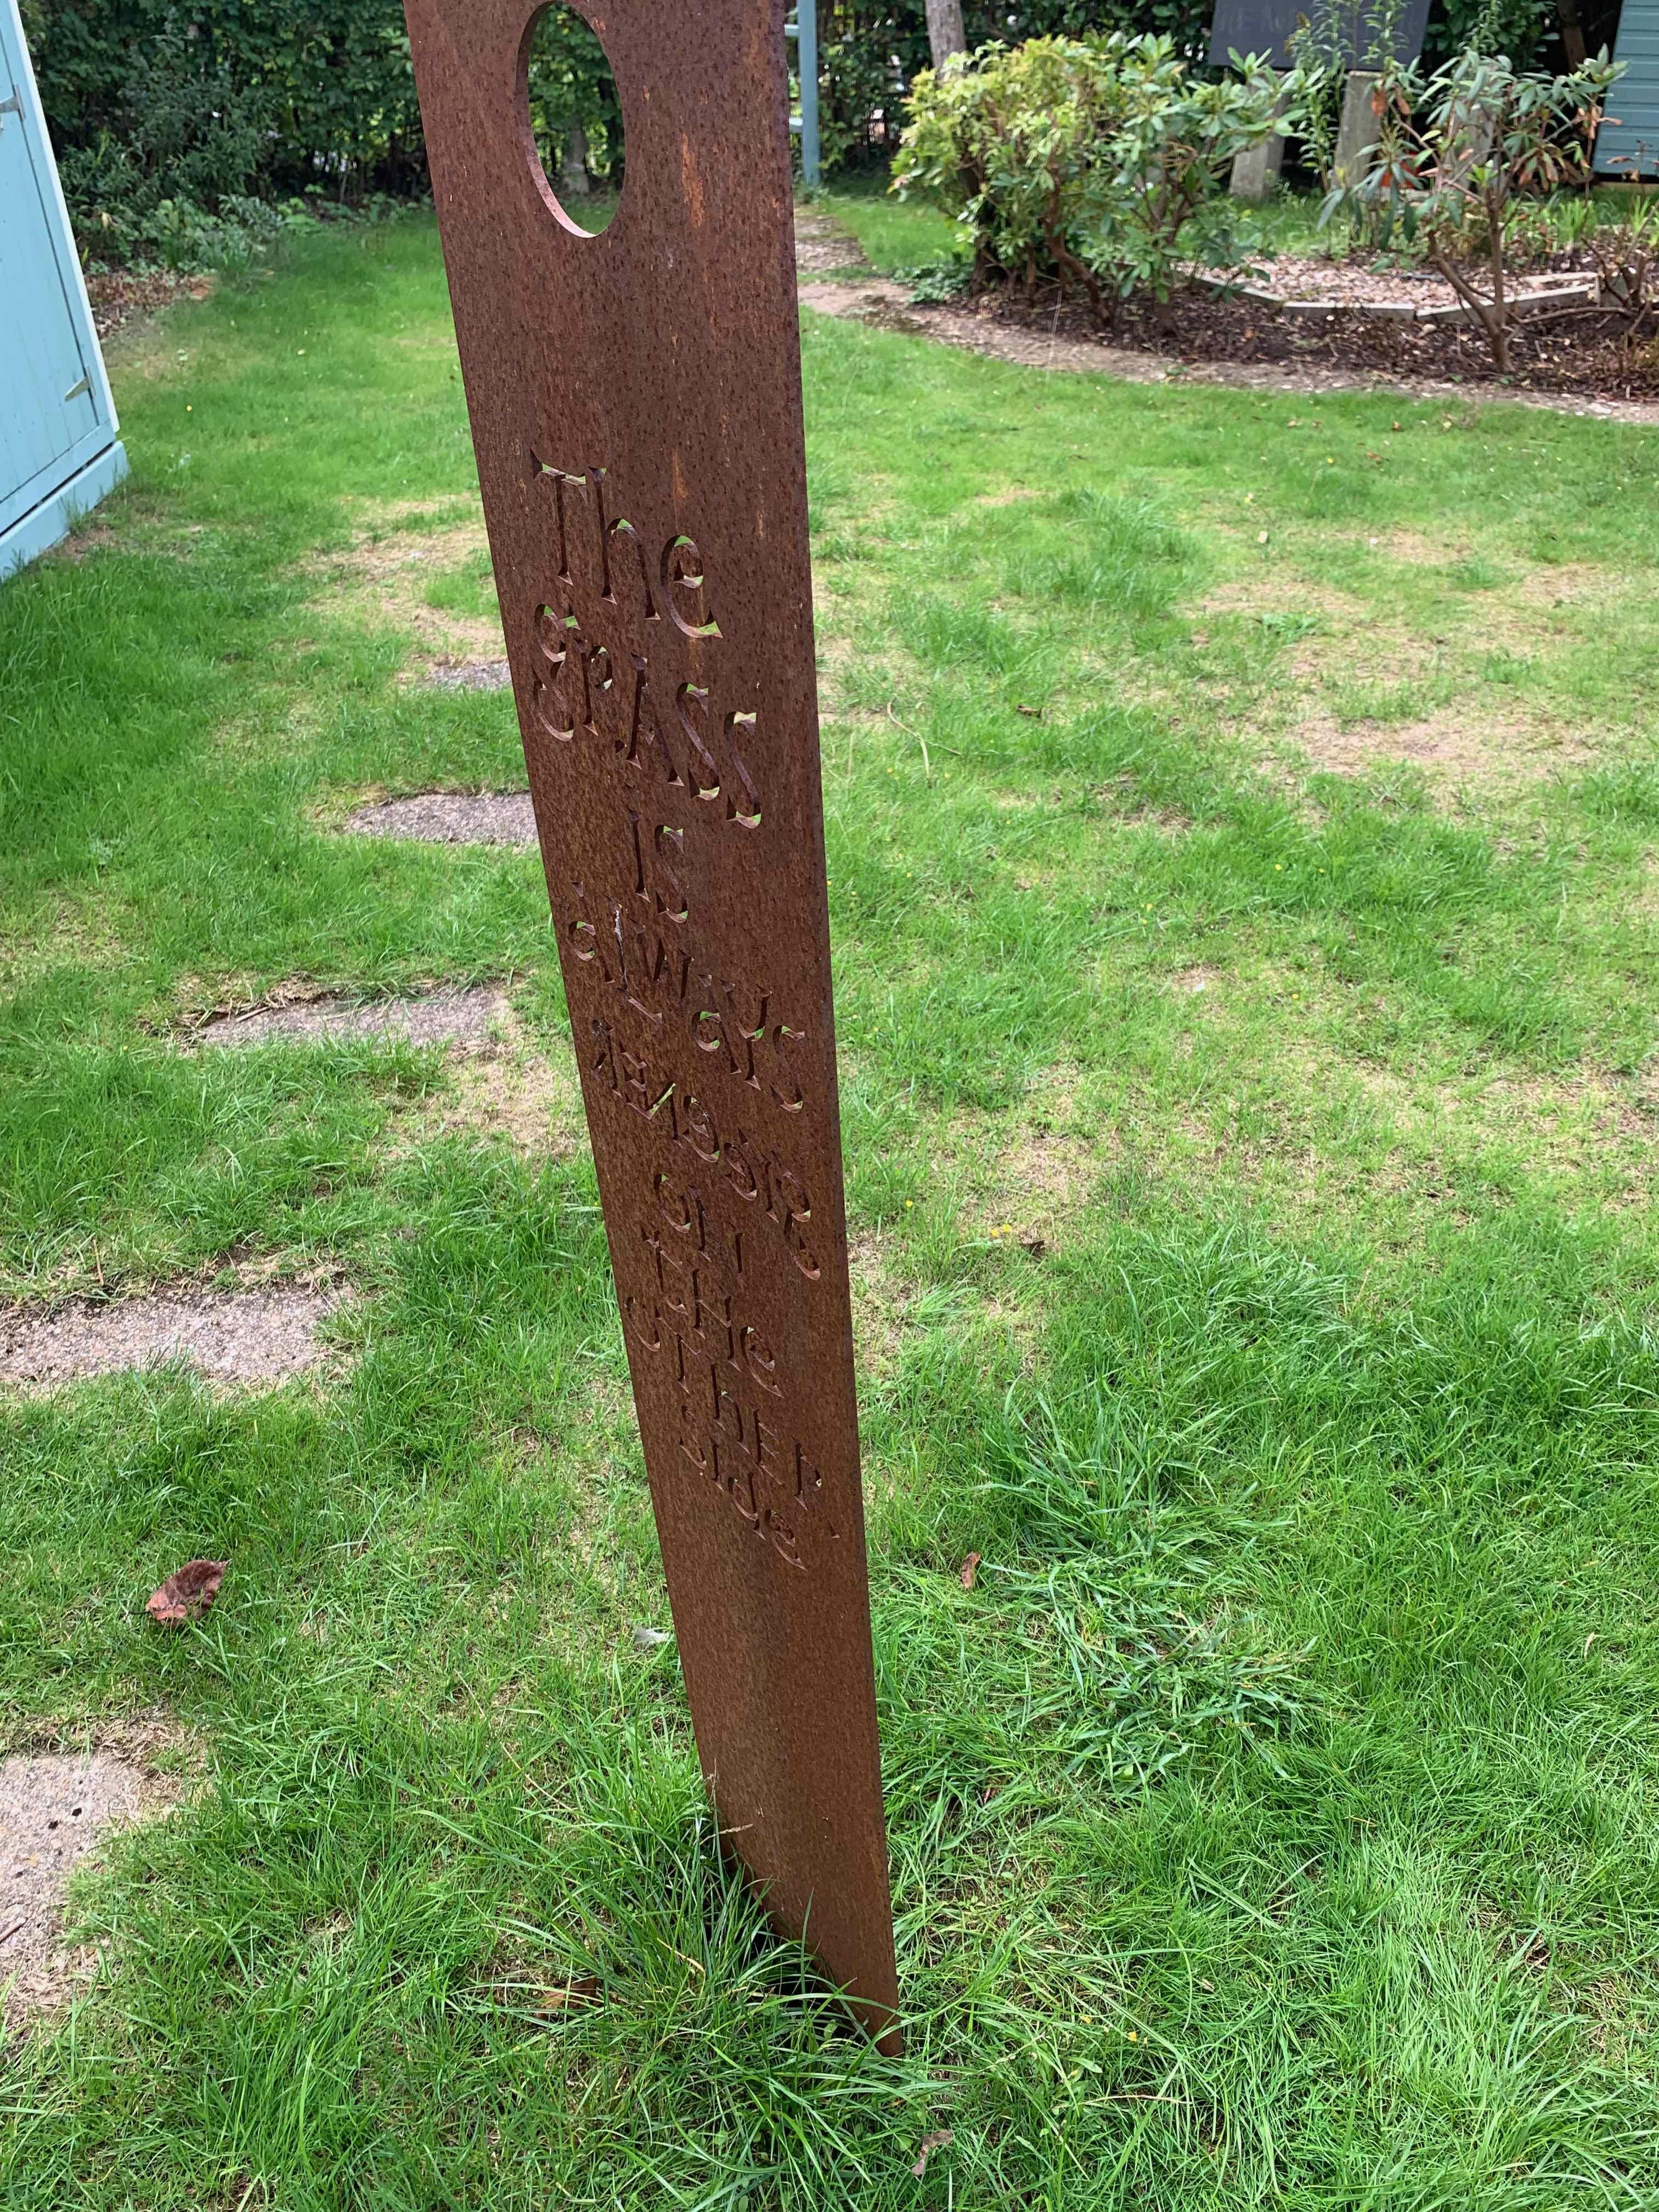 This is an editioned sculpture by one of the world’s most creative Letterwork Sculptors and will look magnificent in a lawn or bed.  The lettering has been designed by Annet Stirling and cut out of the Corten Steel by laser.  The sculpture is very